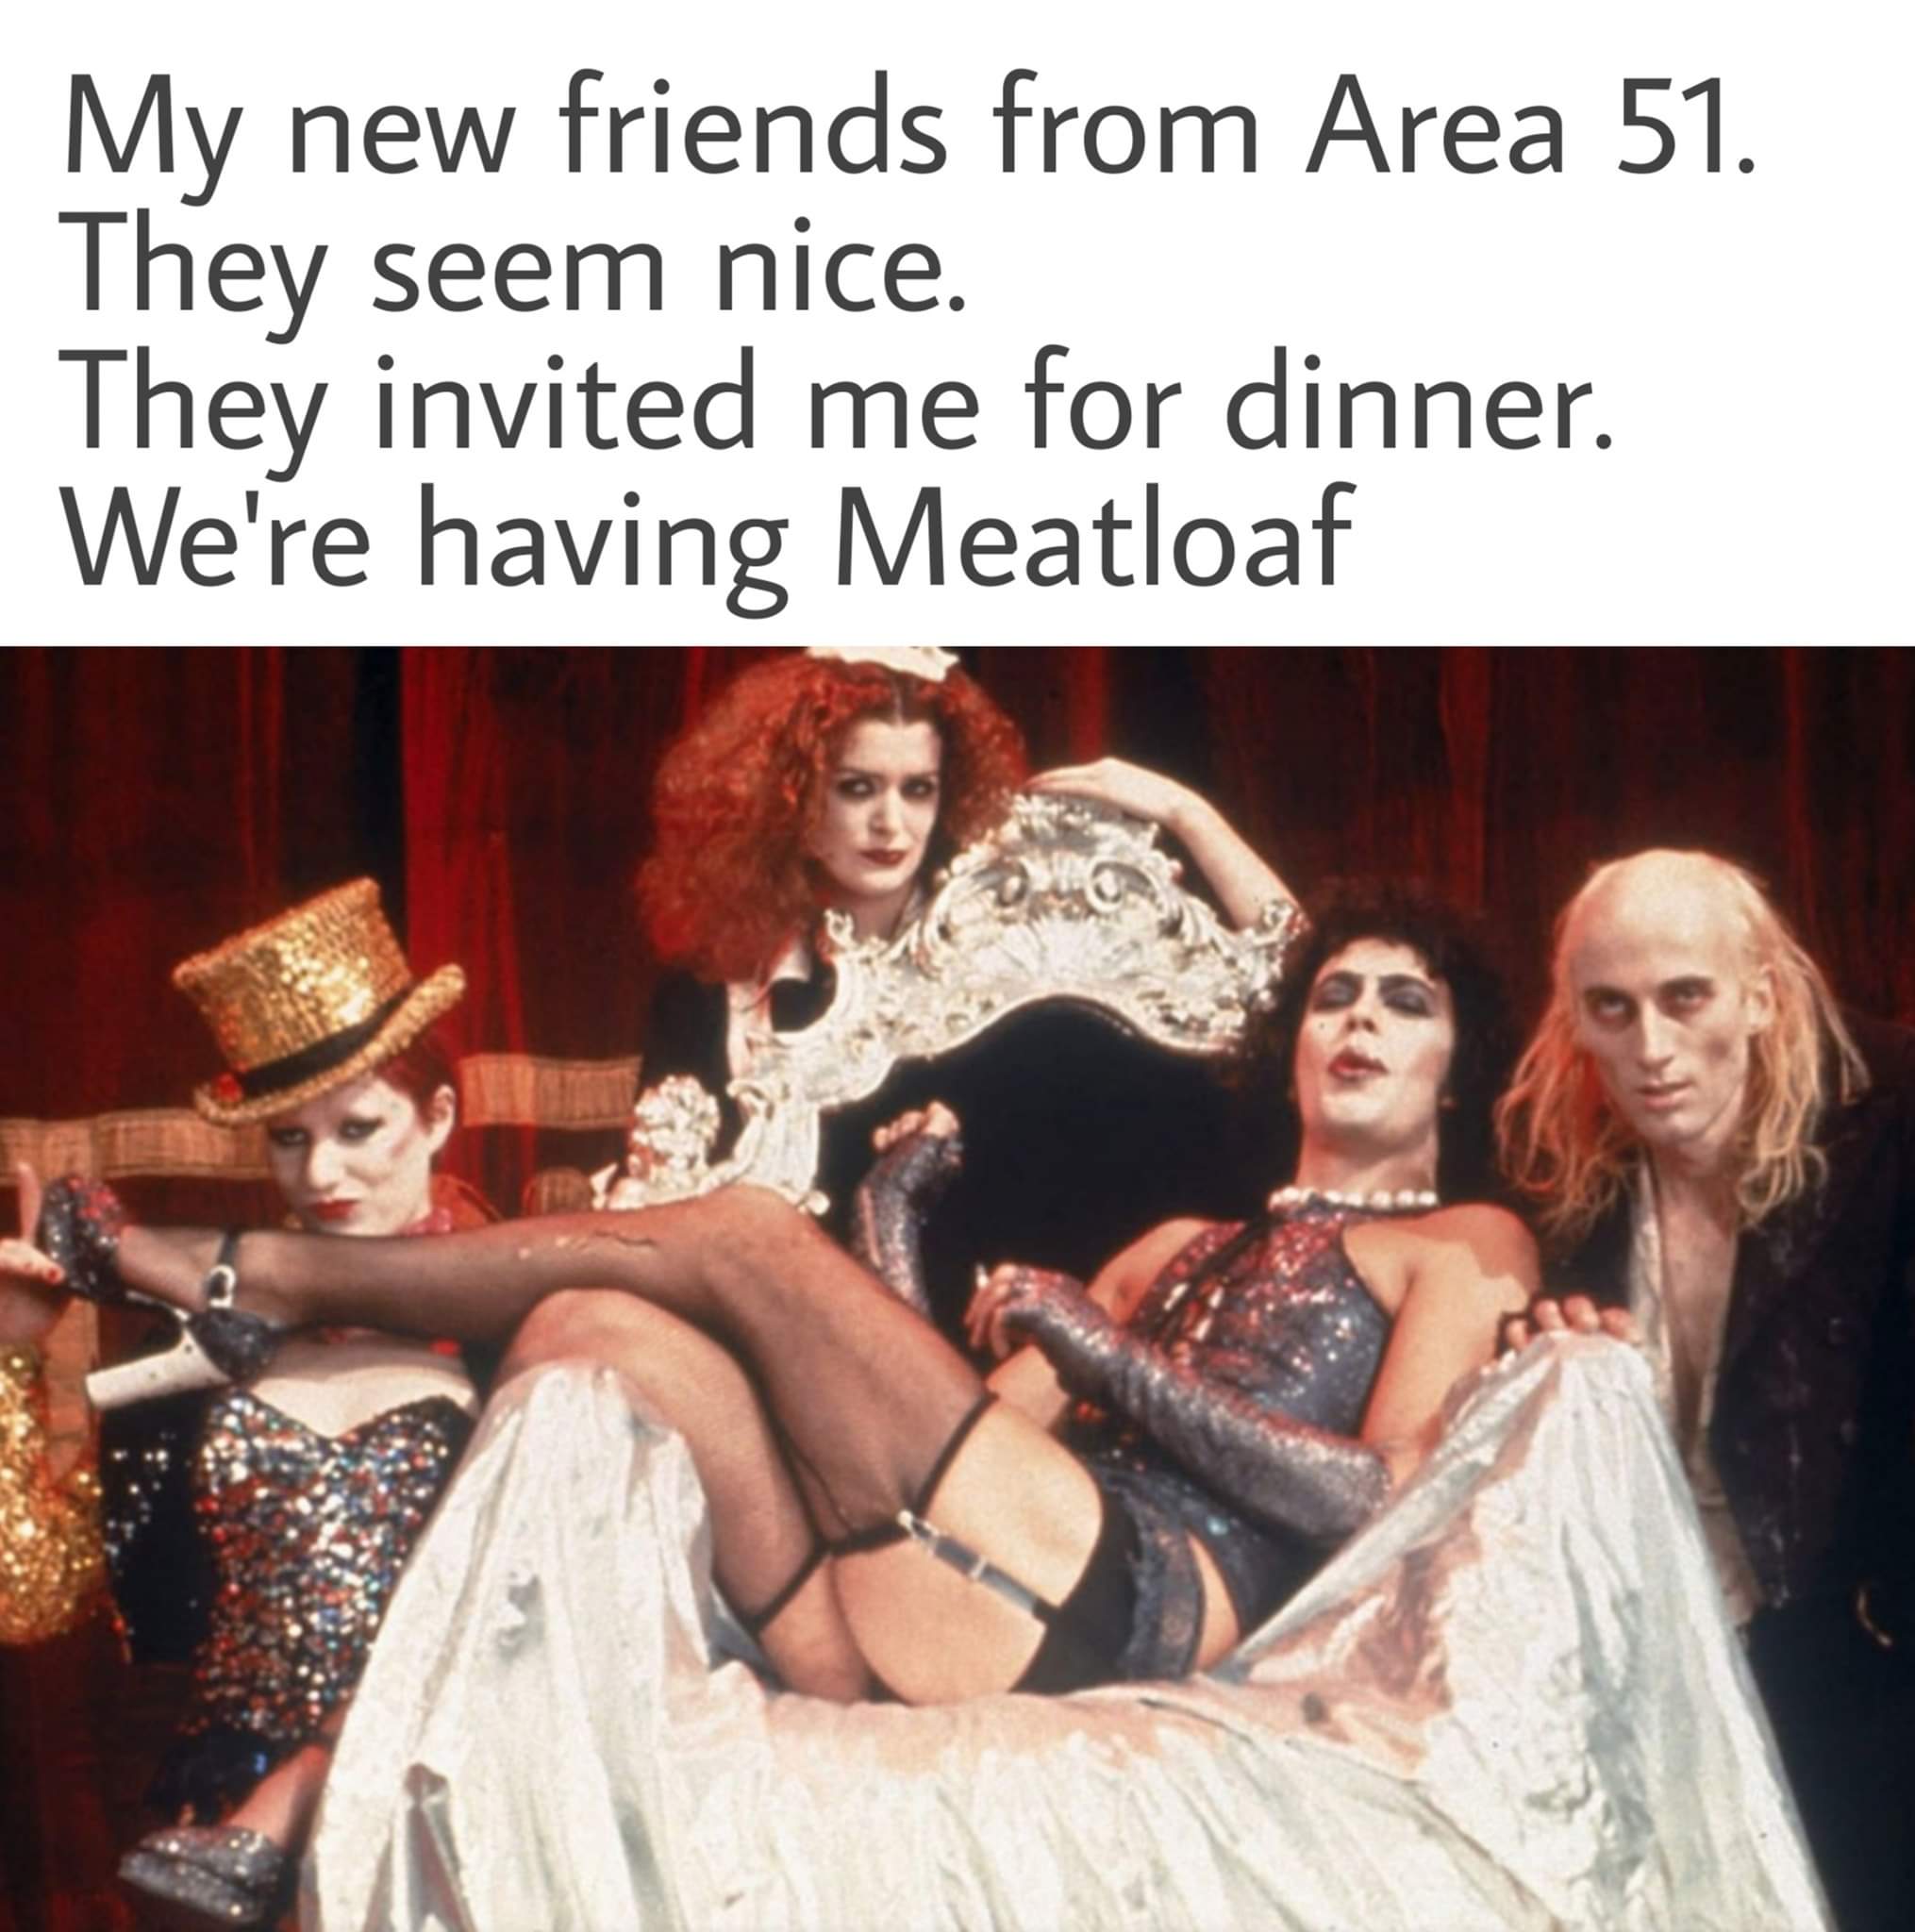 cast of rocky horror picture show - My new friends from Area 51. They seem nice. They invited me for dinner. We're having Meatloaf